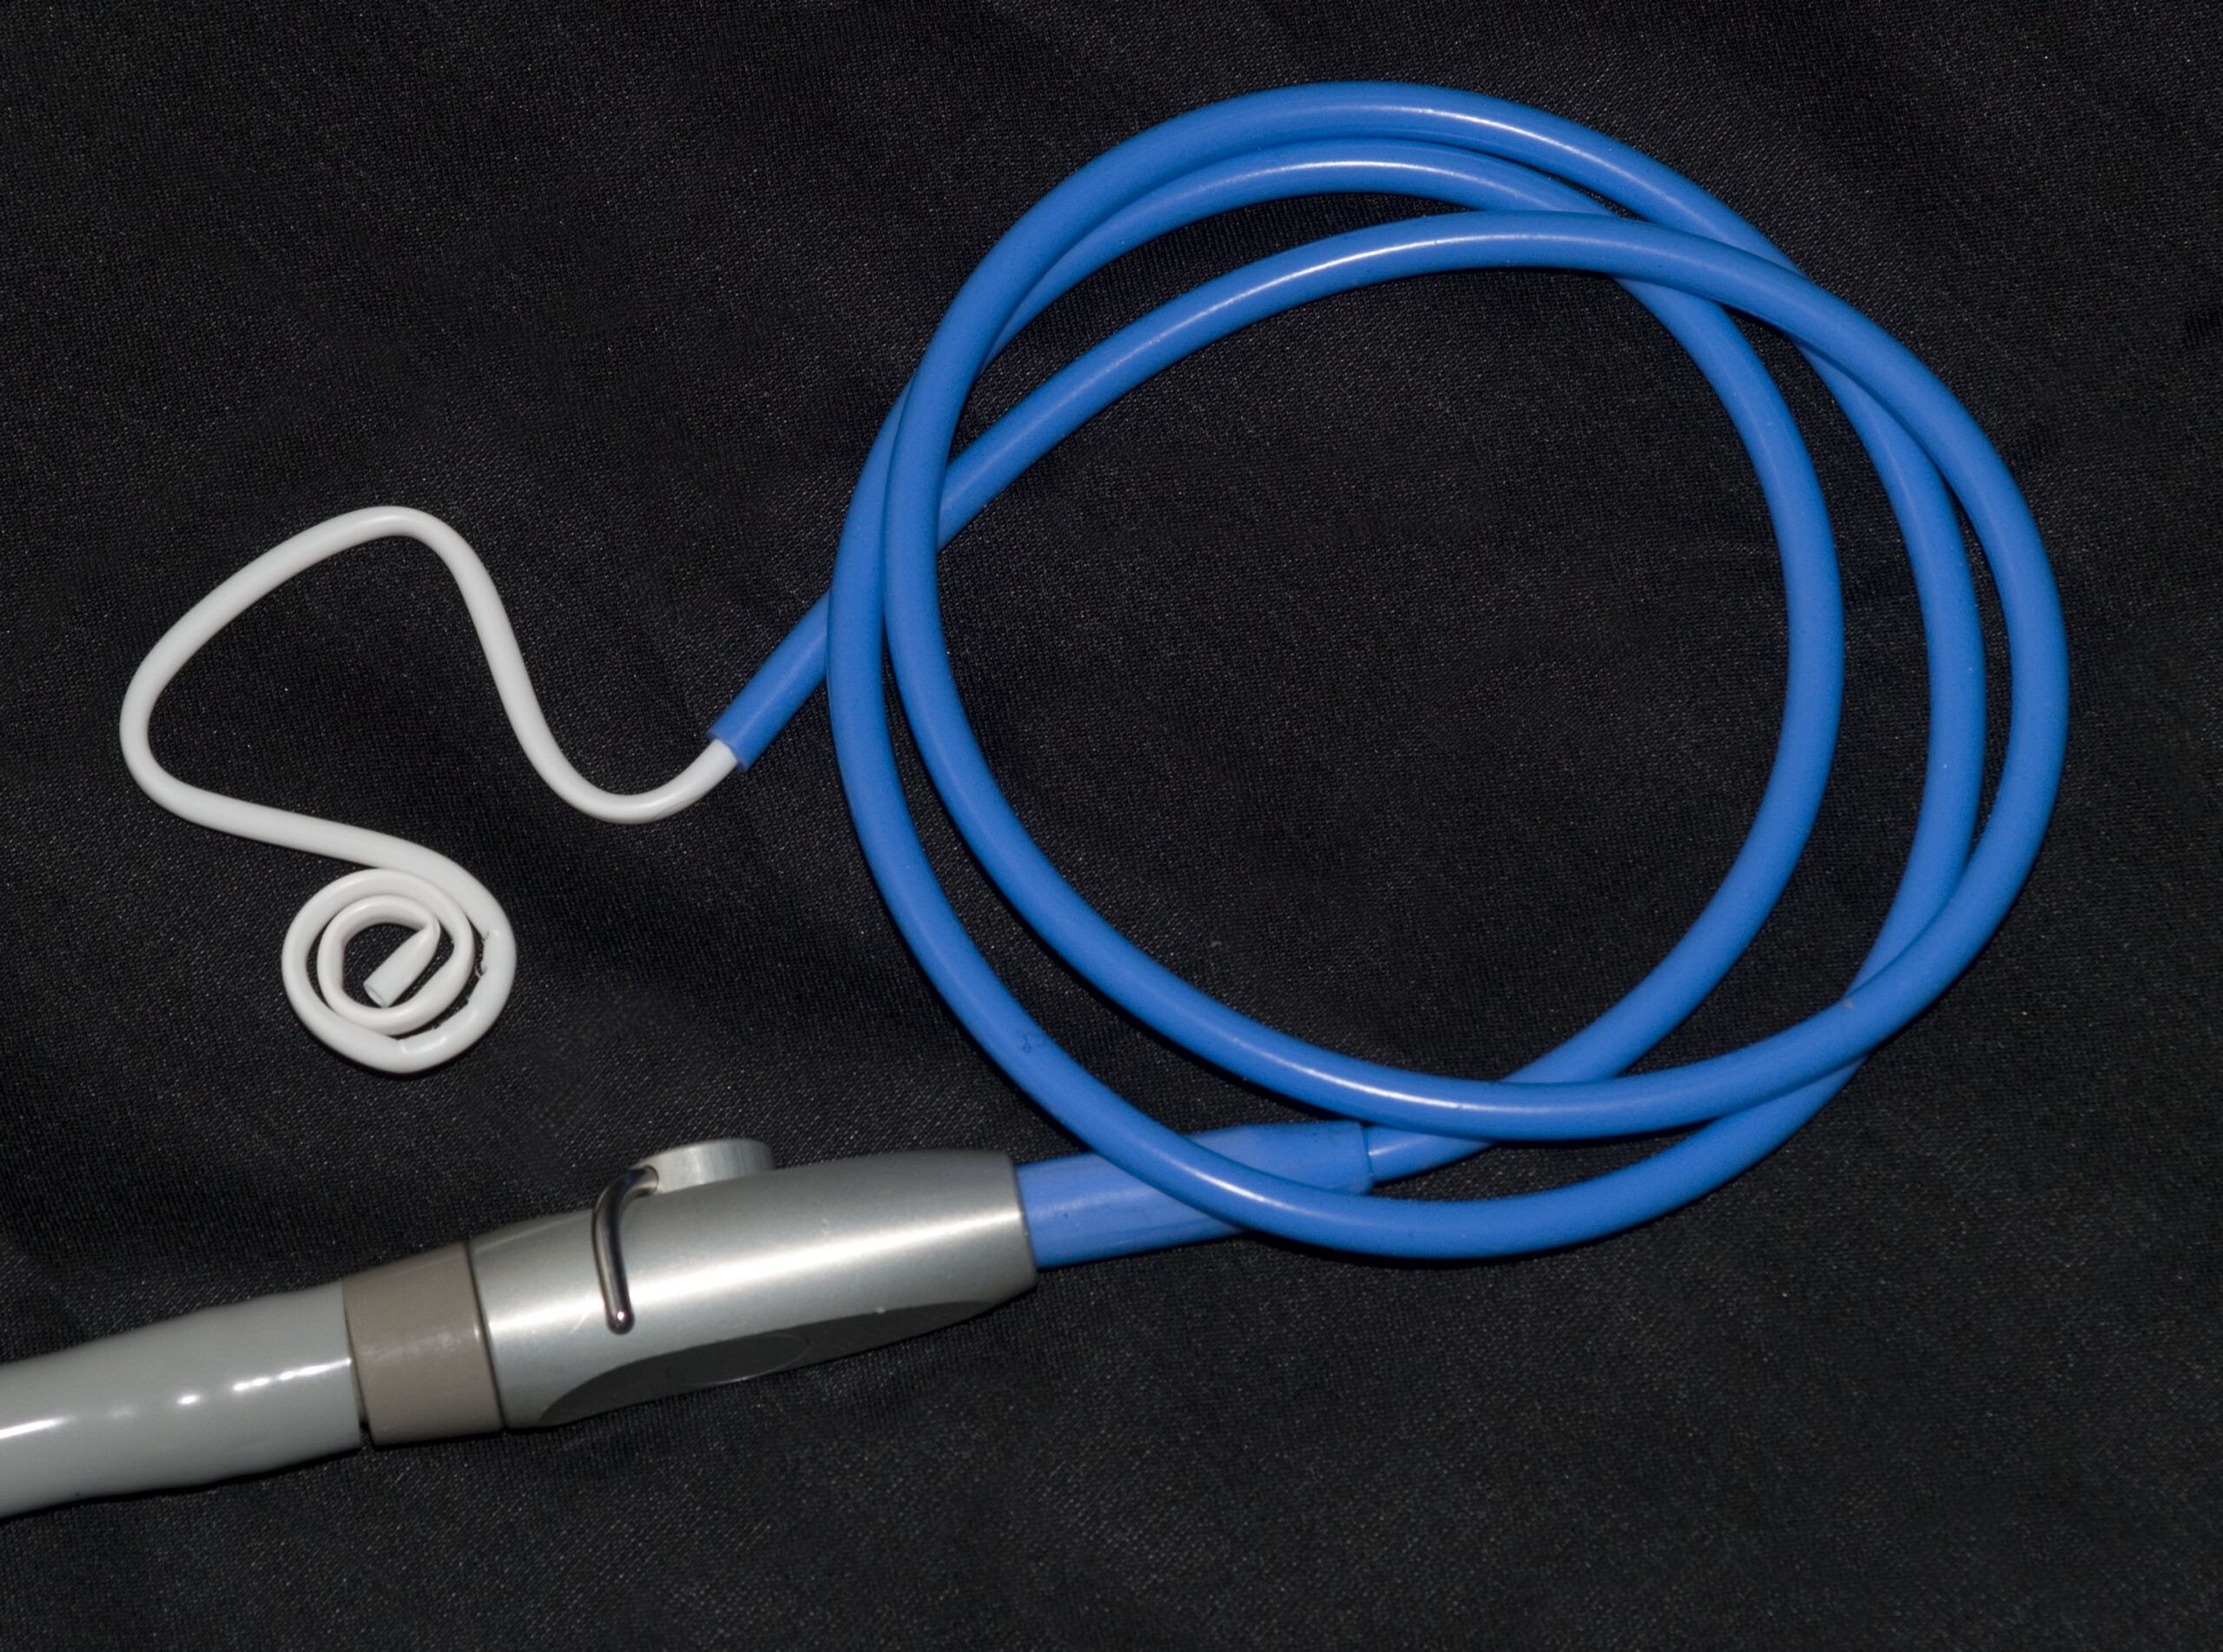 Blue Boa is an adaptive HVE tubing that pairs with many suction tips including the Orsing Hygoformic and Otis Formejects. Great for hands-free suctioning!